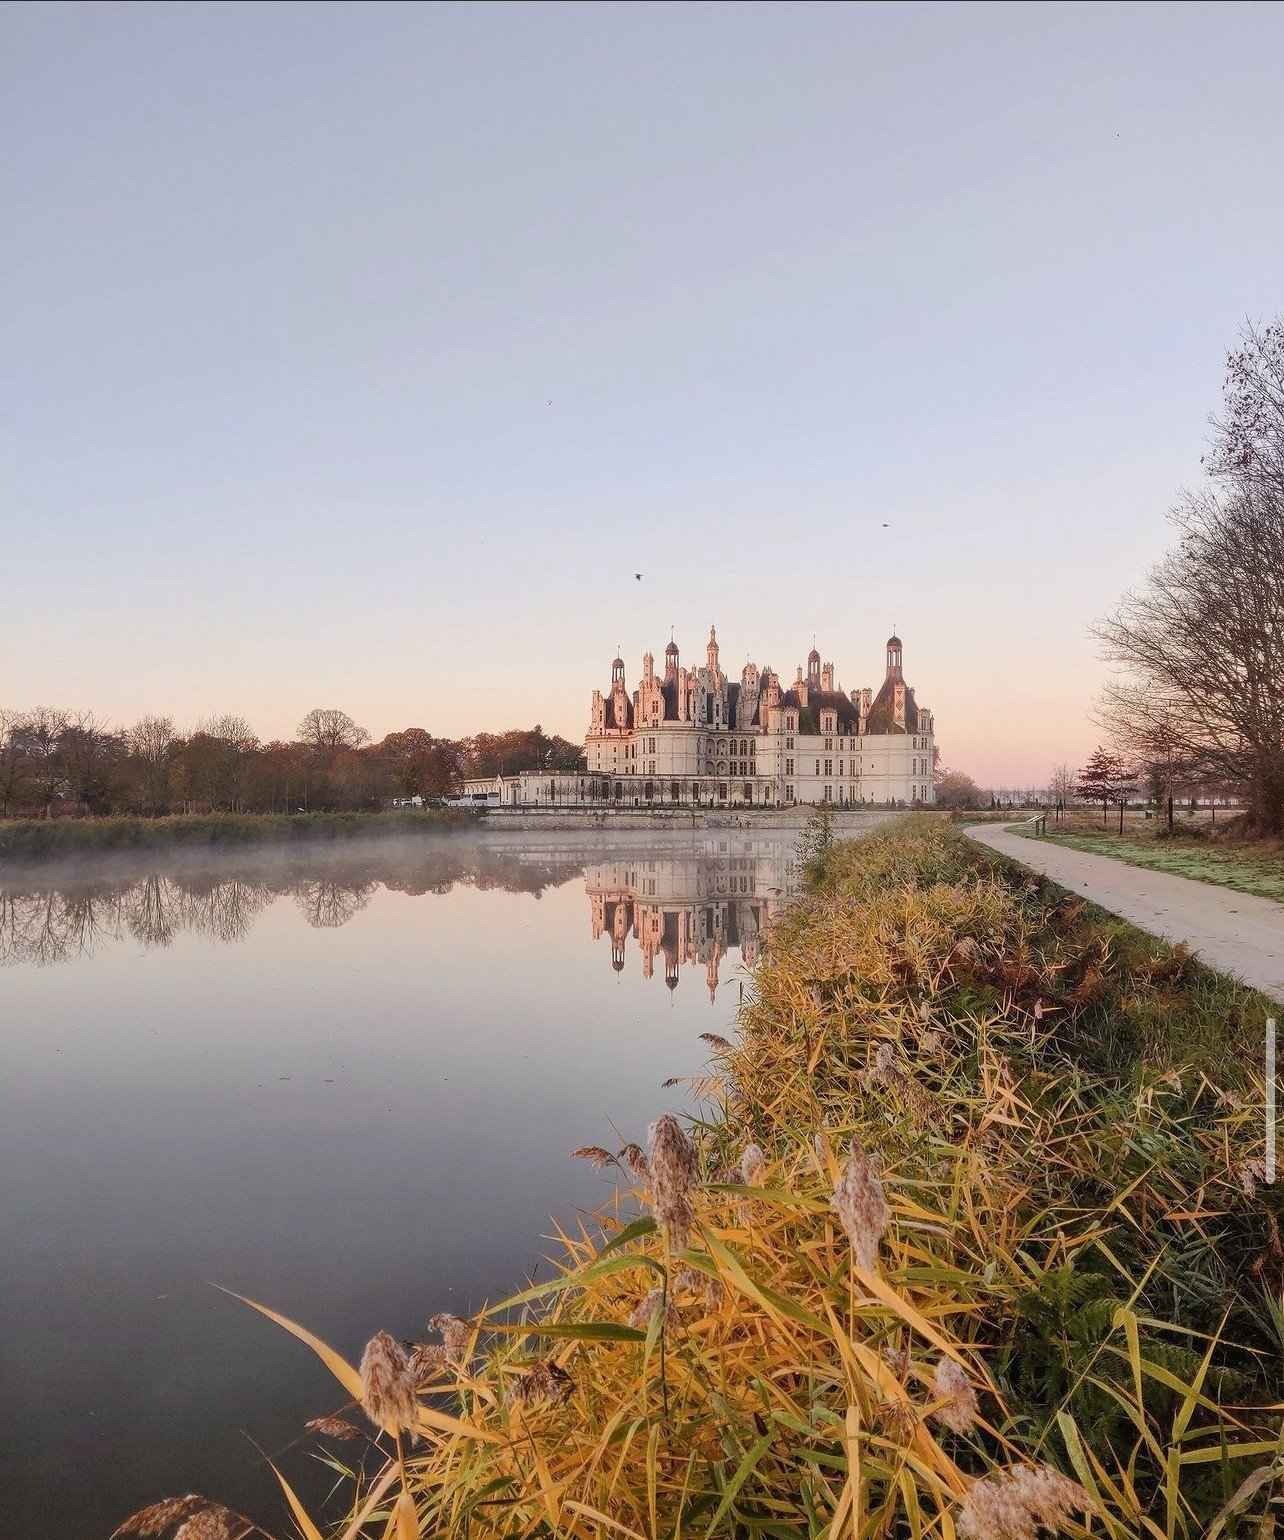 Explore the French countryside, and you'll likely come upon the largest Renaissance castle in Loire Valley, The Chateau de Chambord. The private 13K+ acre estate is home to just one hotel, the boutique accommodation, @relaisdechambord, set amongst pr